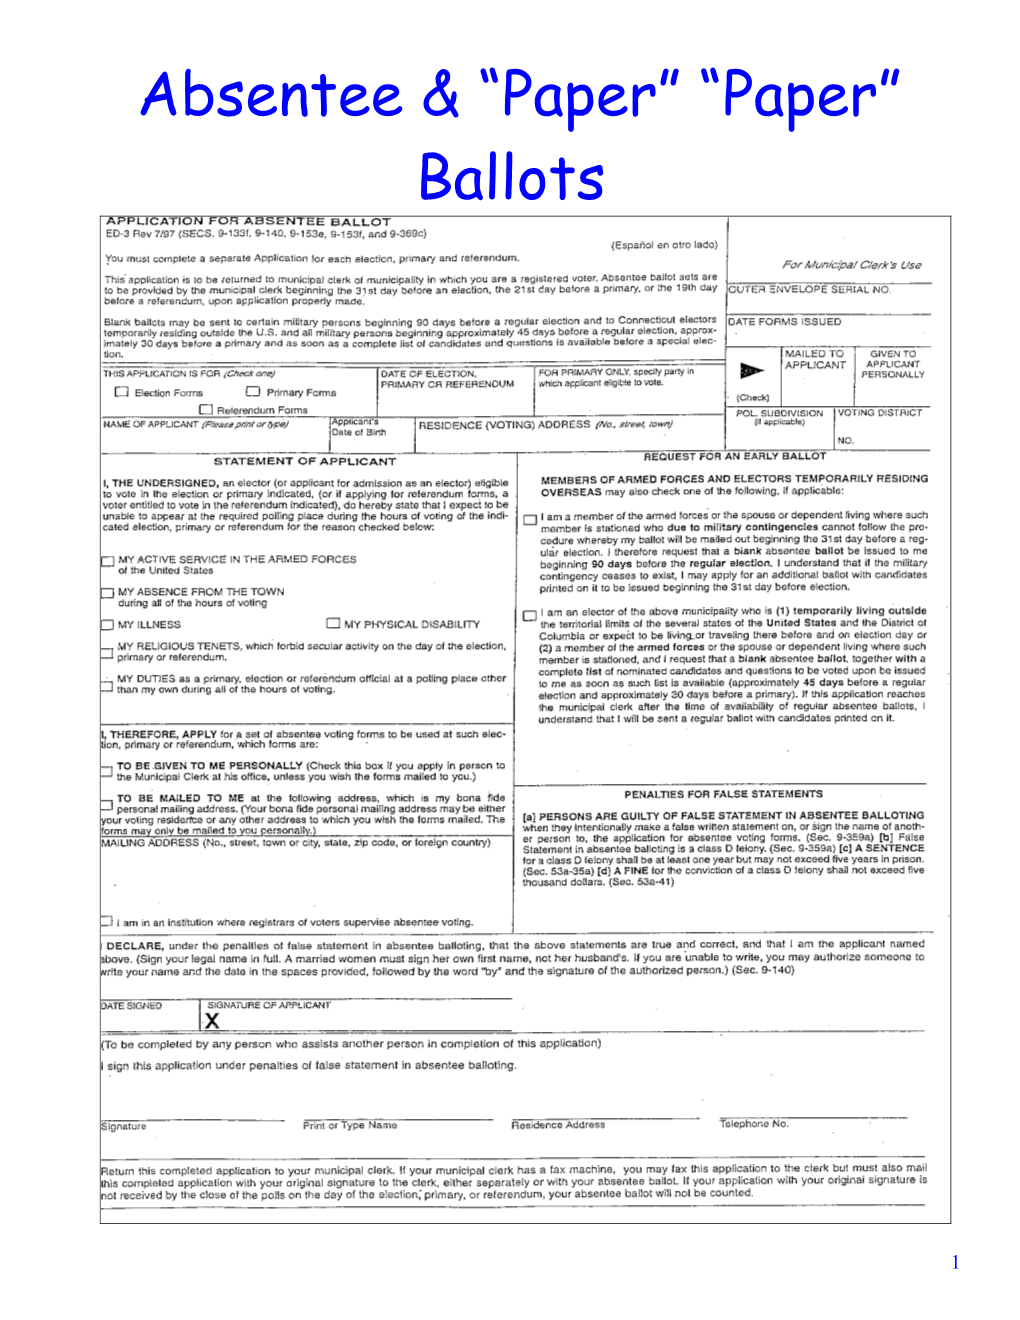 Types of Absentee Ballots (Issued by Town Clerks and Counted by Registrars)